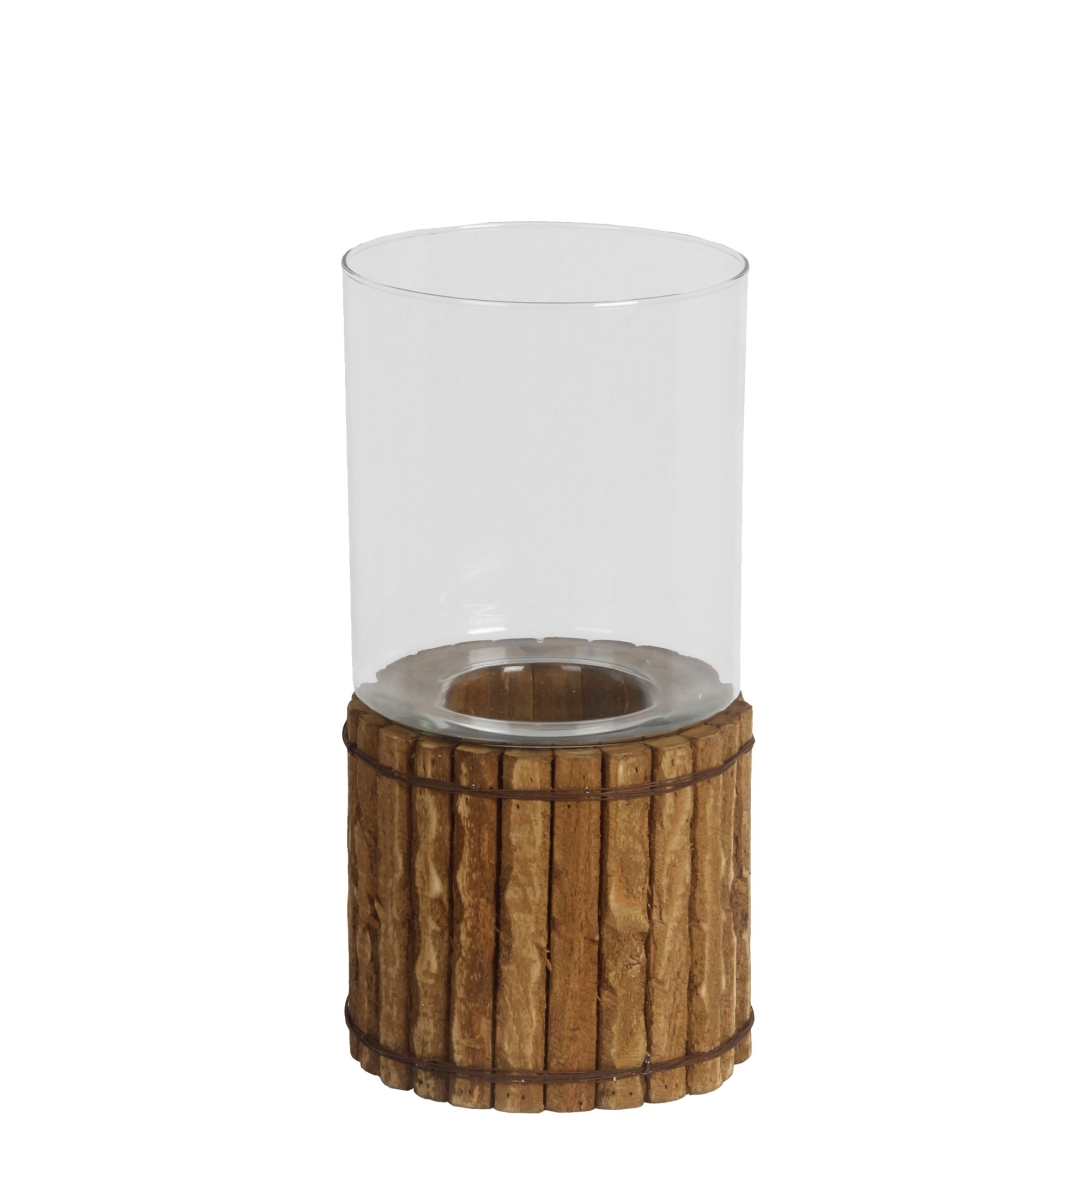 88799 8 X 8 X 15.5 In. Organic Wooden Candle Holder, Large